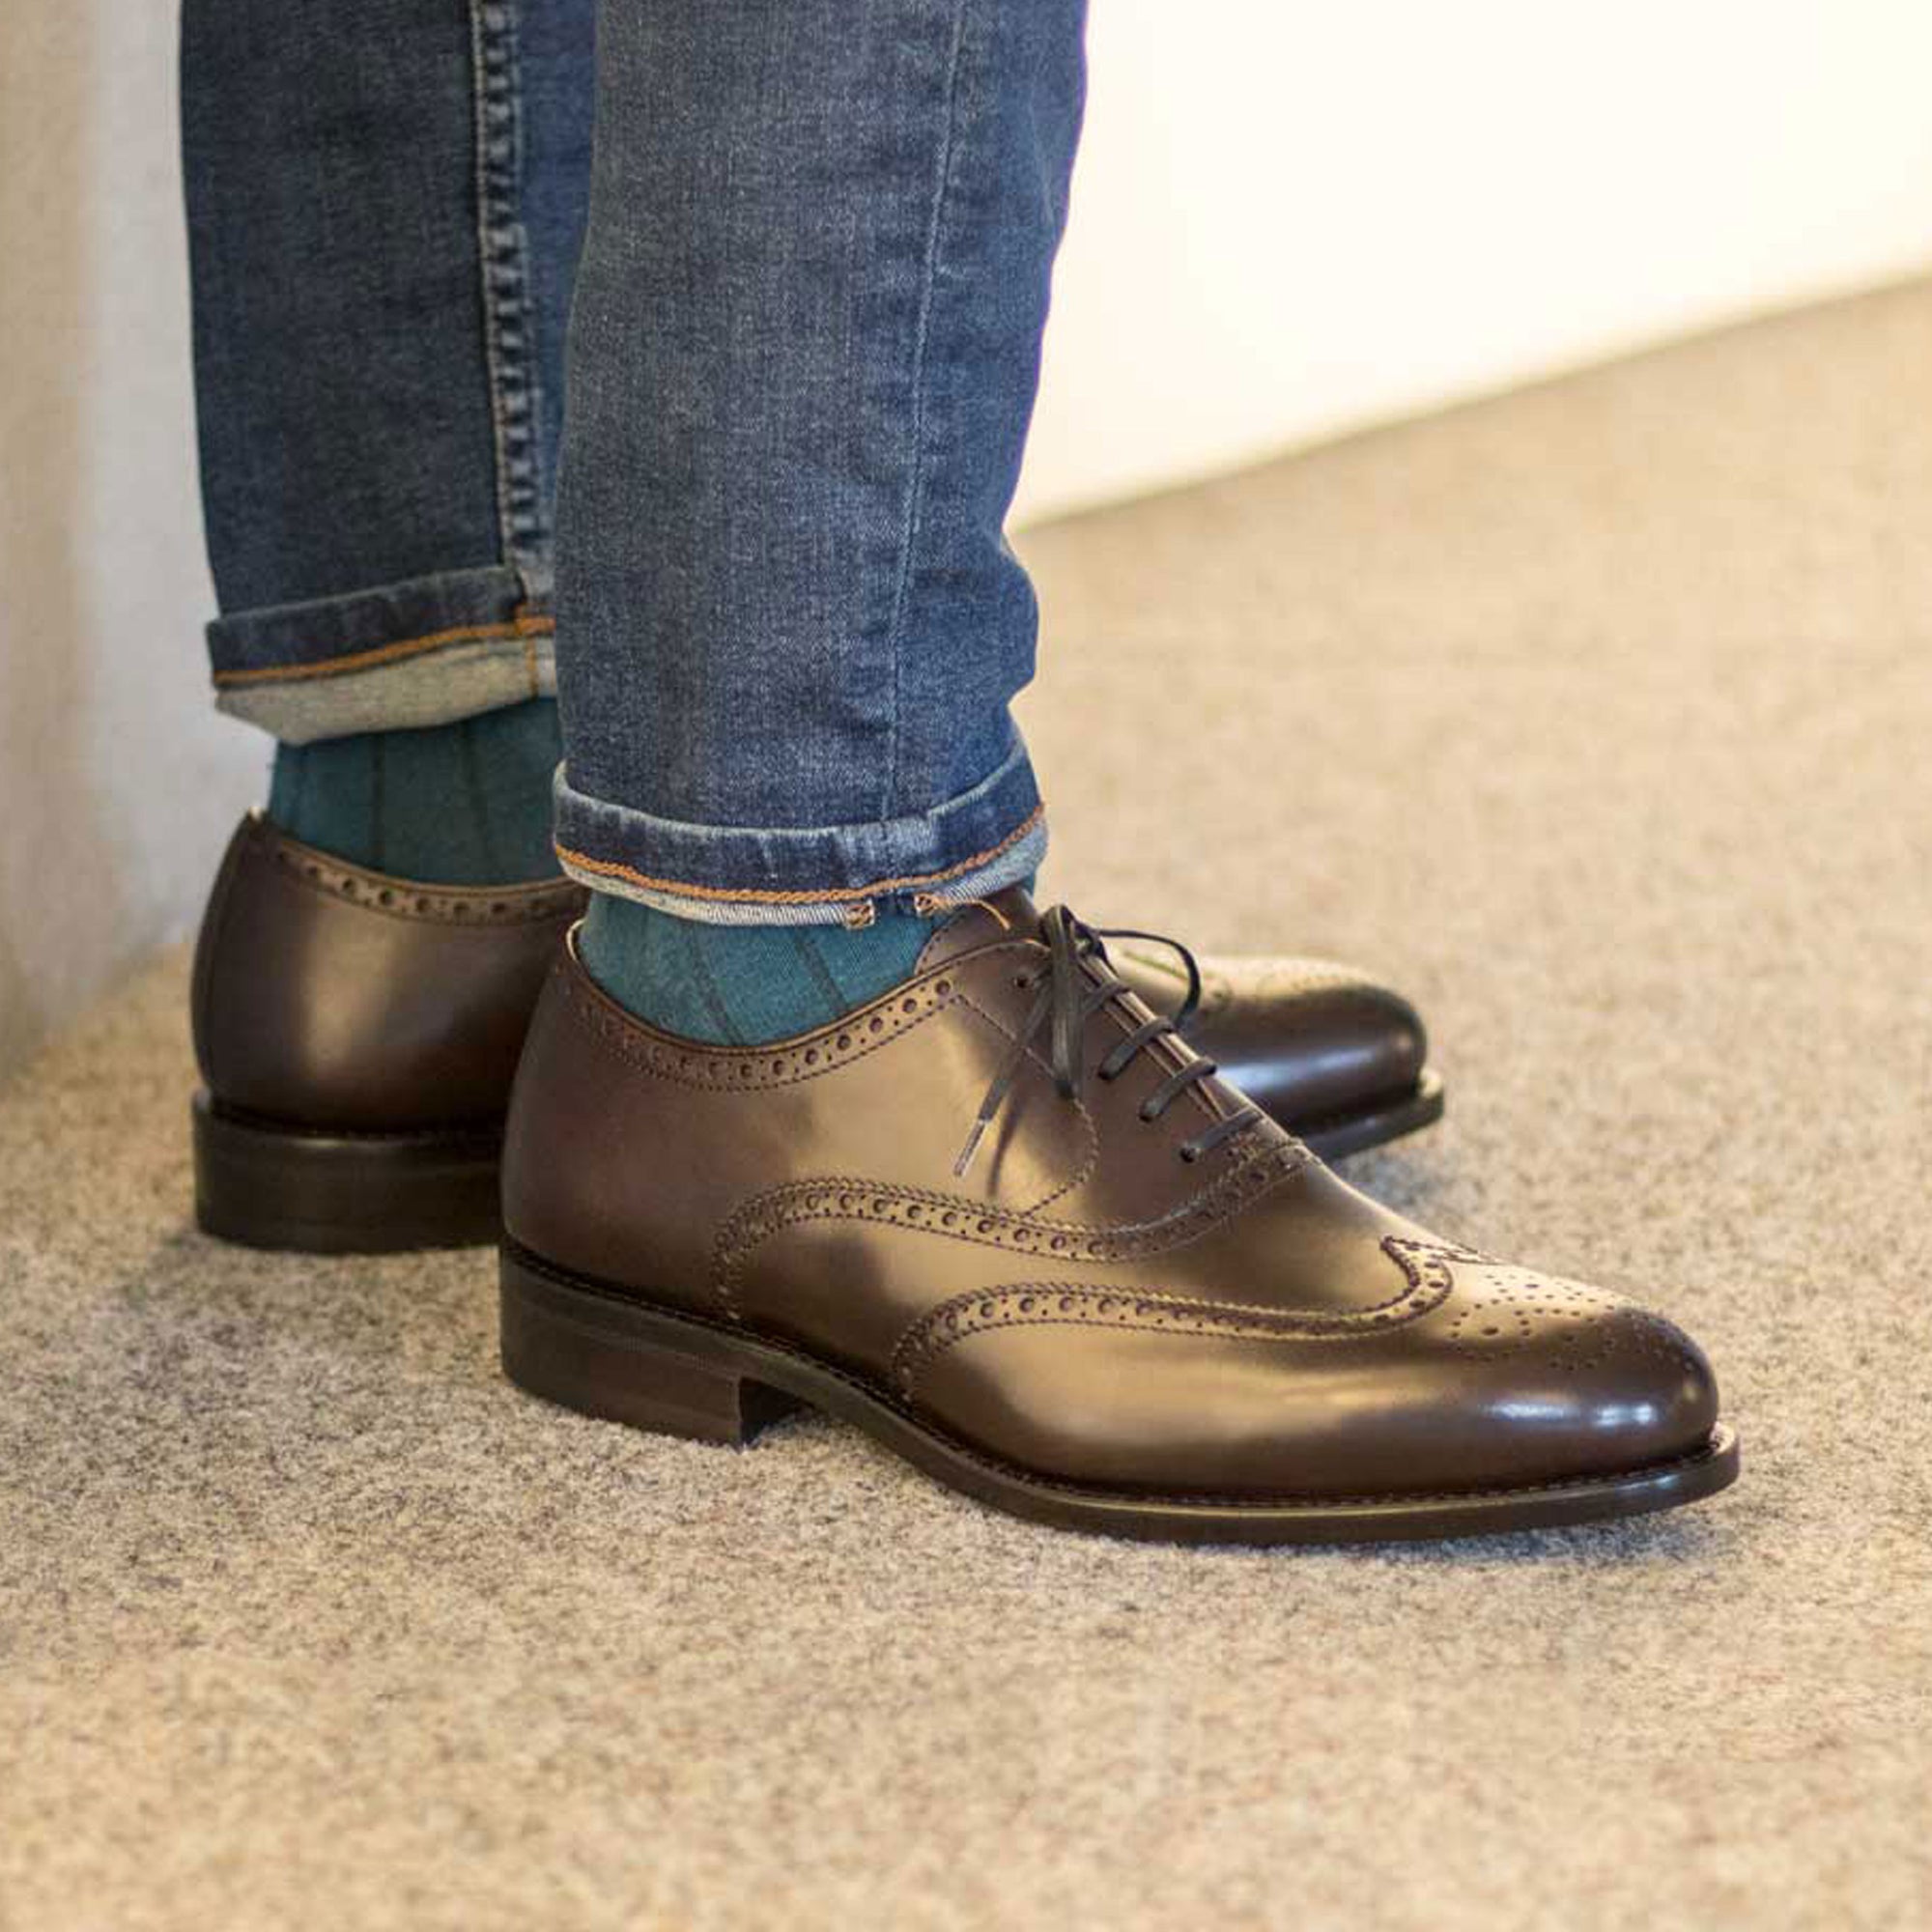 Man wearing English Look Round Toe Dark Brown Goodyear Welted Wingtip Oxford Brogue Dress Shoes